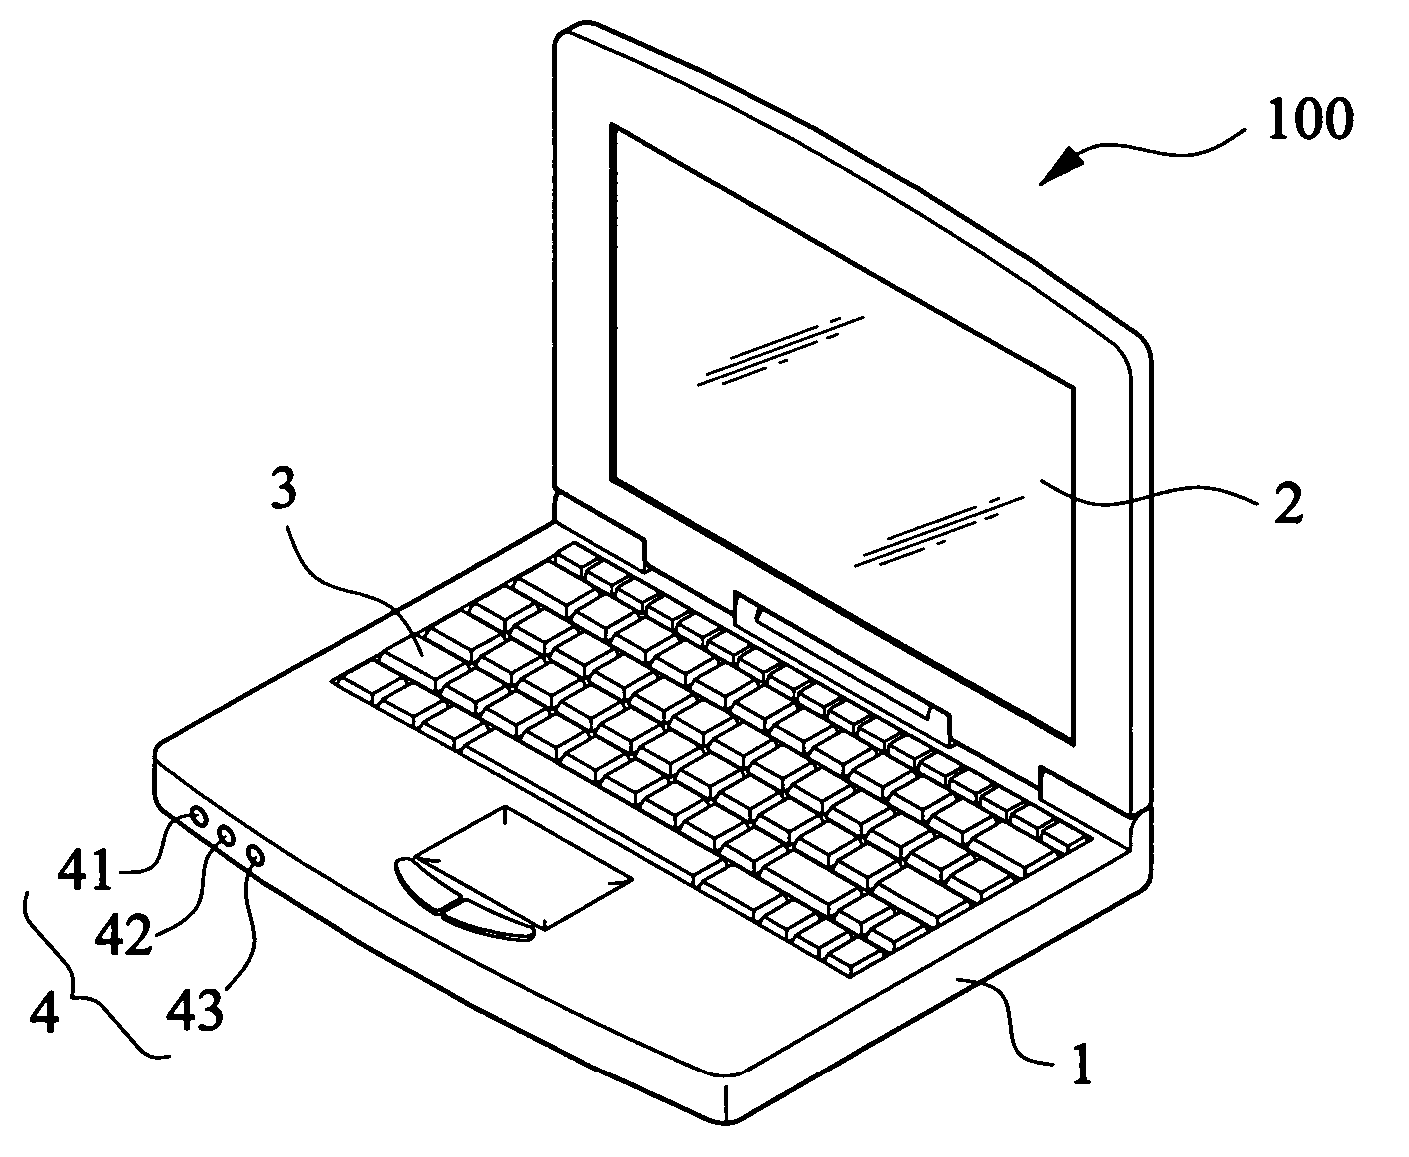 Computer system with network signal level indication device